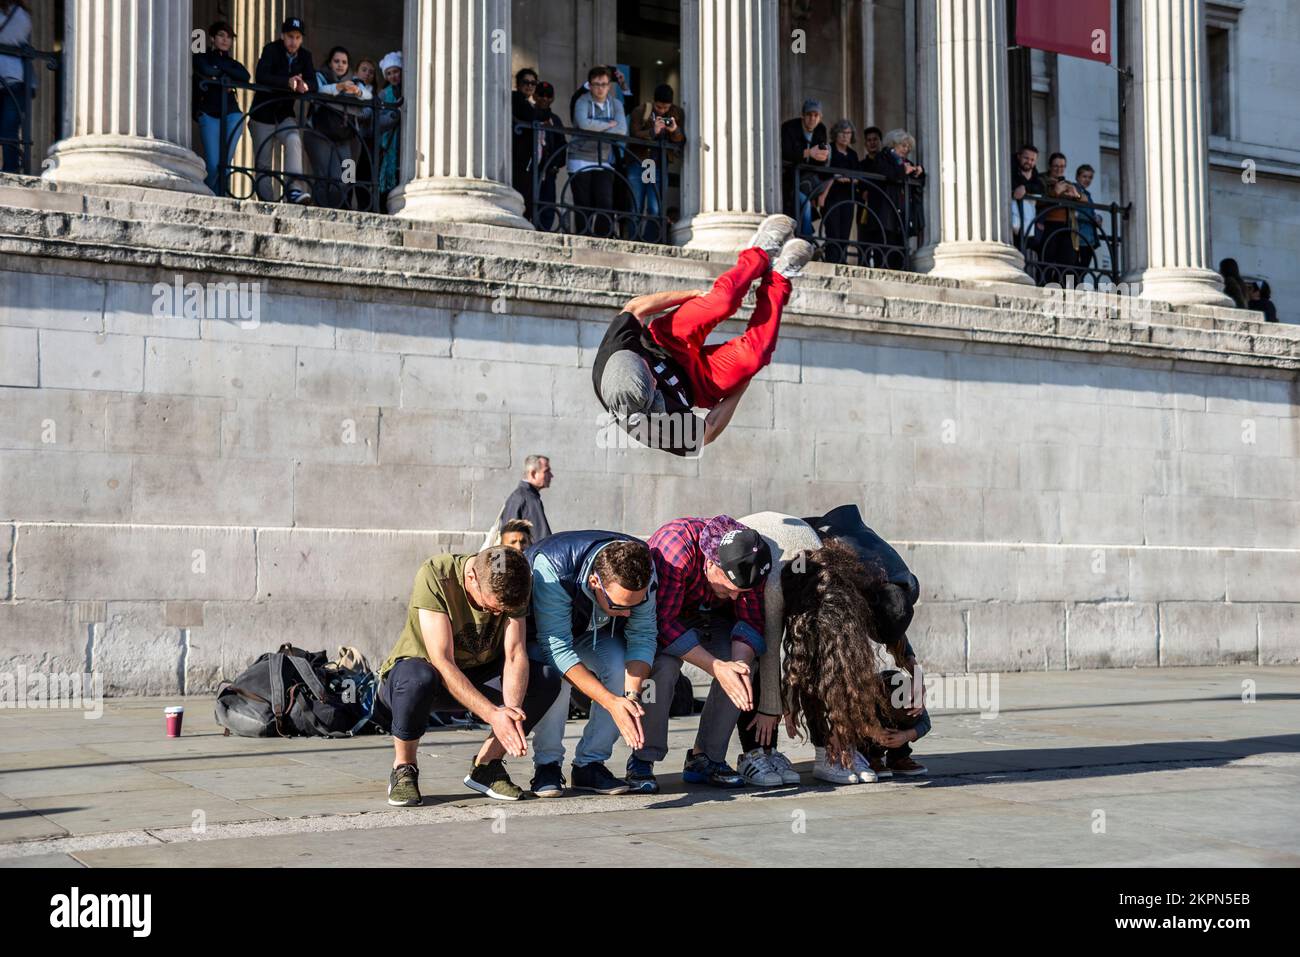 Gymnast. Street entertainer performing gymnastics outside The National Gallery using members of the public to jump over. Tourists involved. Acrobat Stock Photo